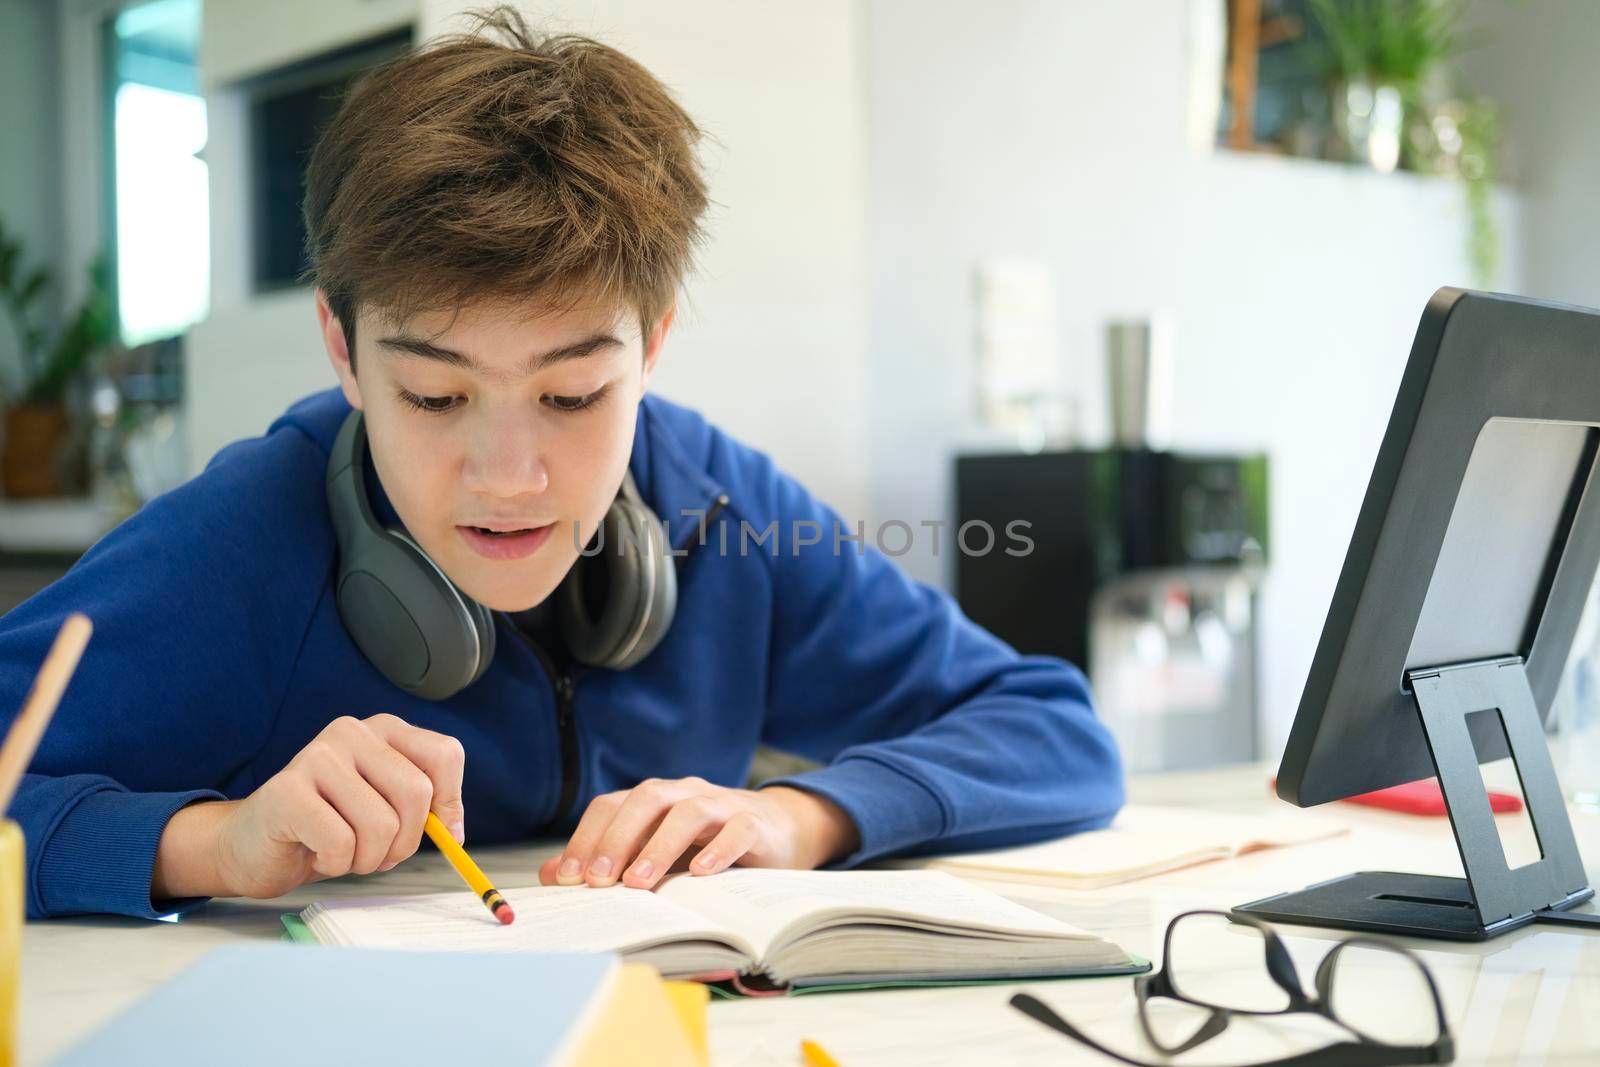 Student boy with tablet computer learning at home
 by ijeab